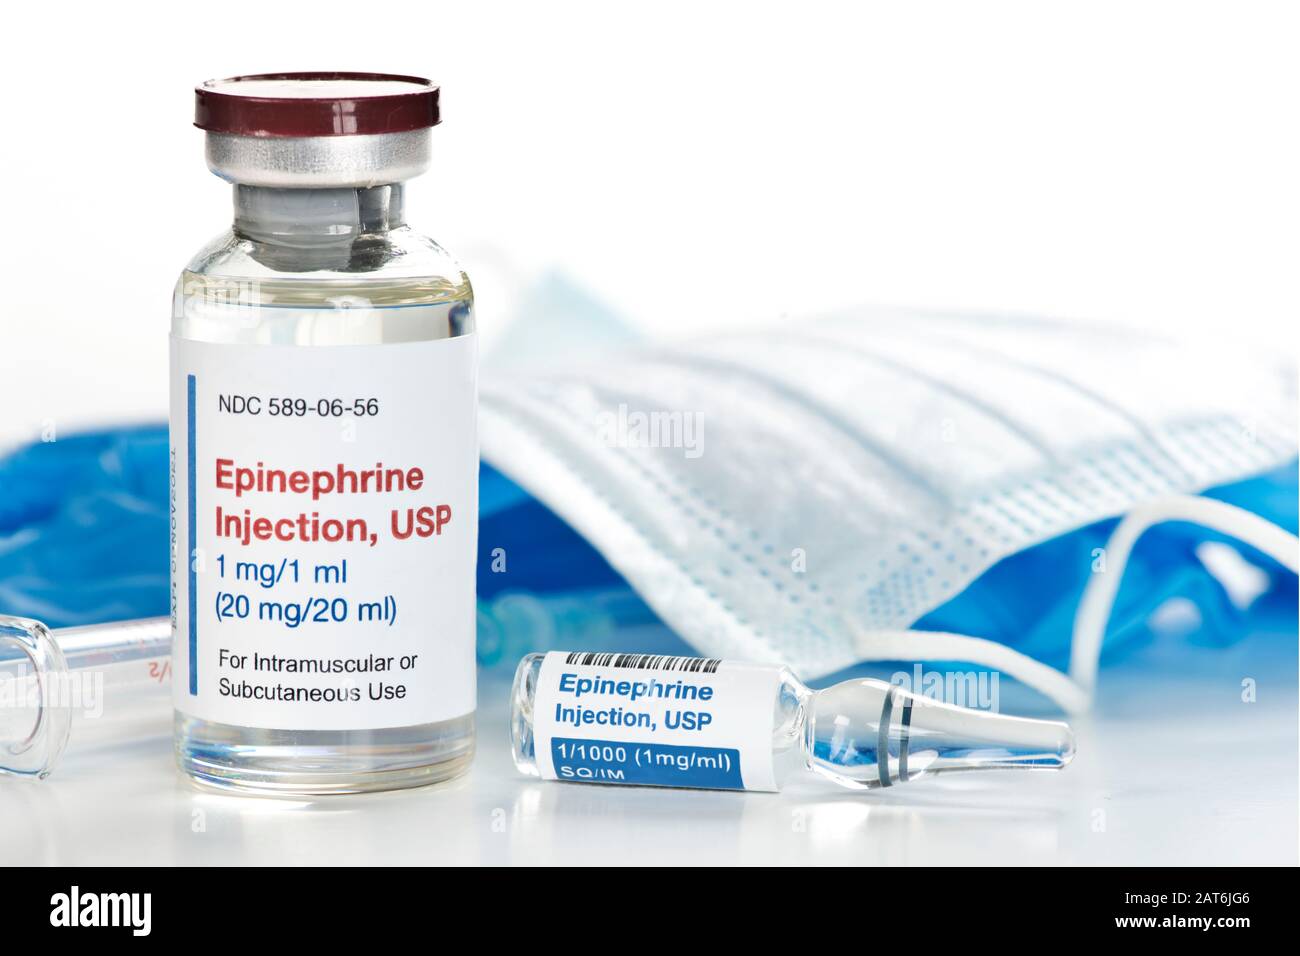 Epinephrine injection solution in 20 ml vial and clear1 ml ampule with mask, gloves and syringe. Stock Photo